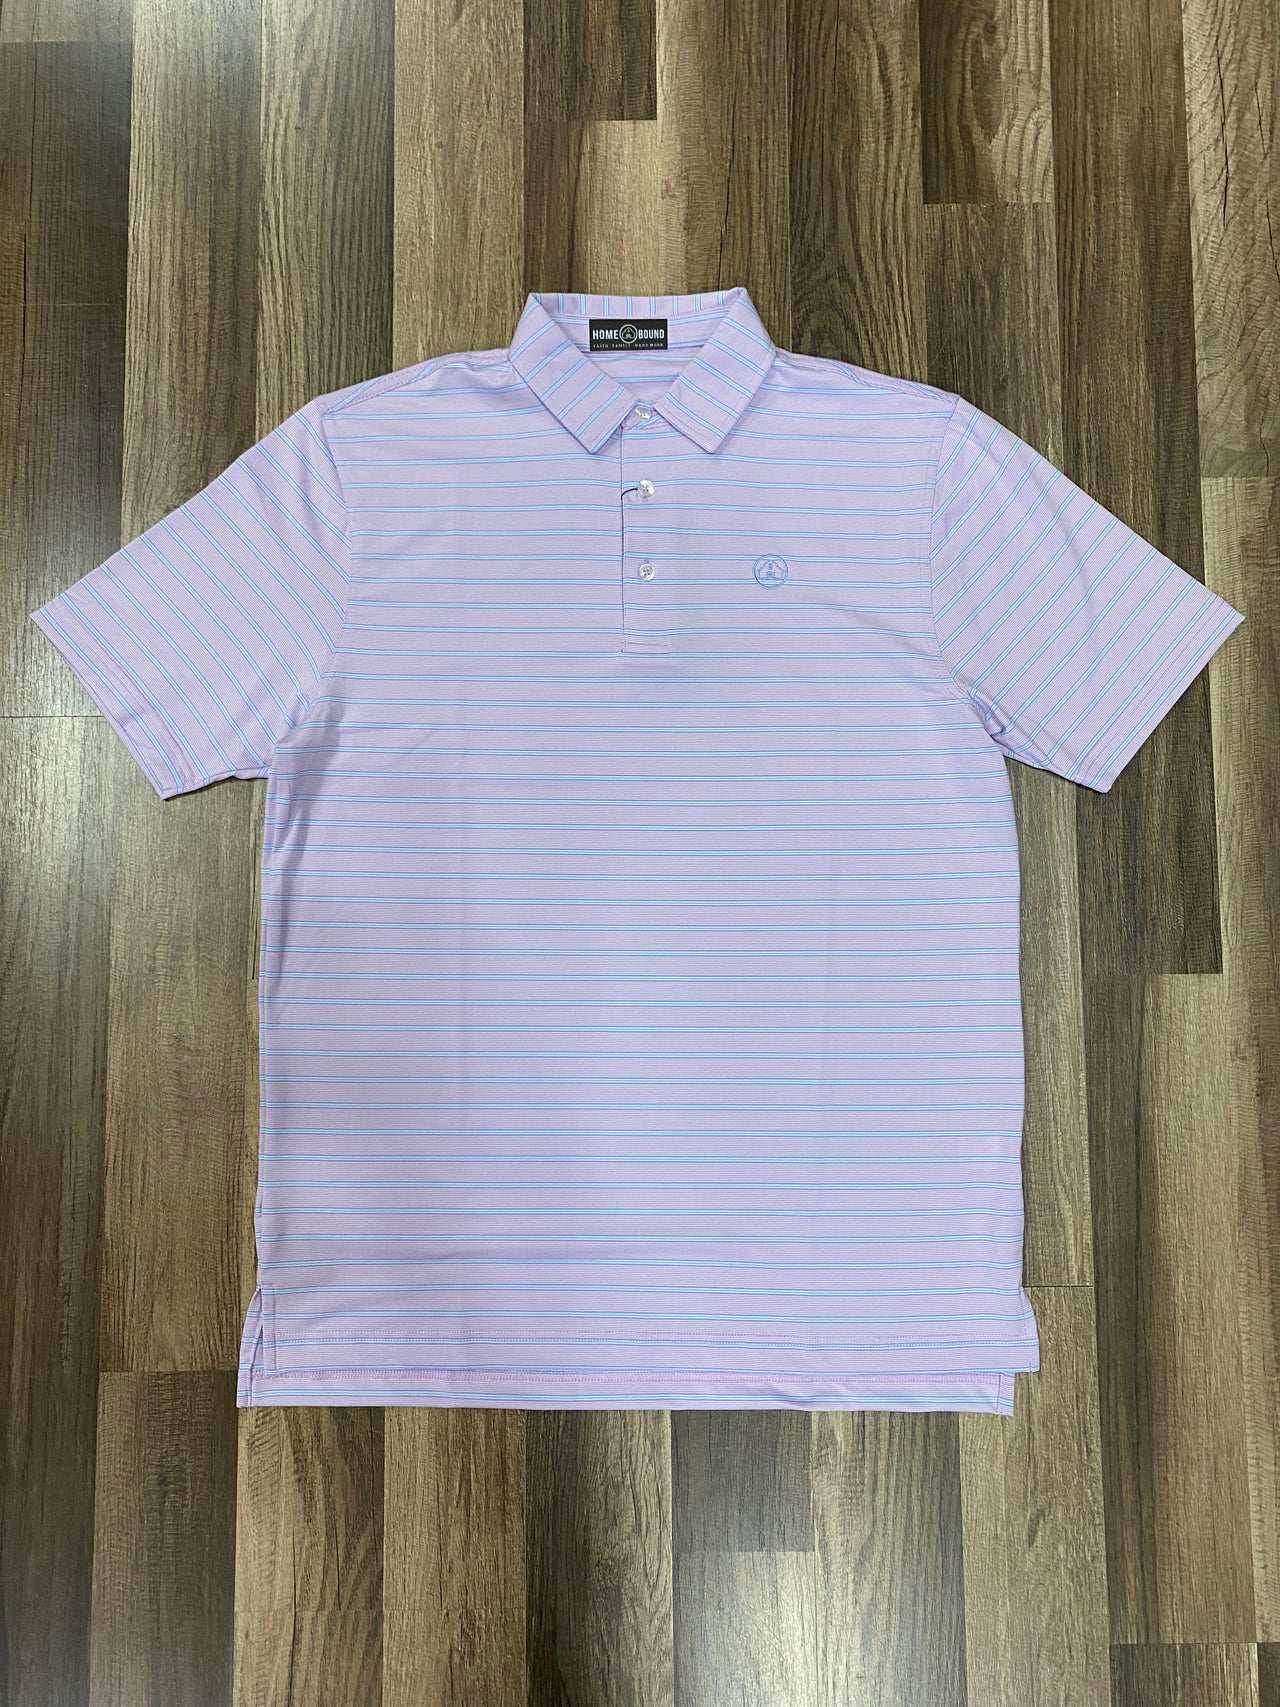 Lilac Striped Performance Polo with Periwinkle and white stripes, 95% Polyester 5% Spandex, open sleeve, self-tailored collar. Ideal for golf, work, or date night.